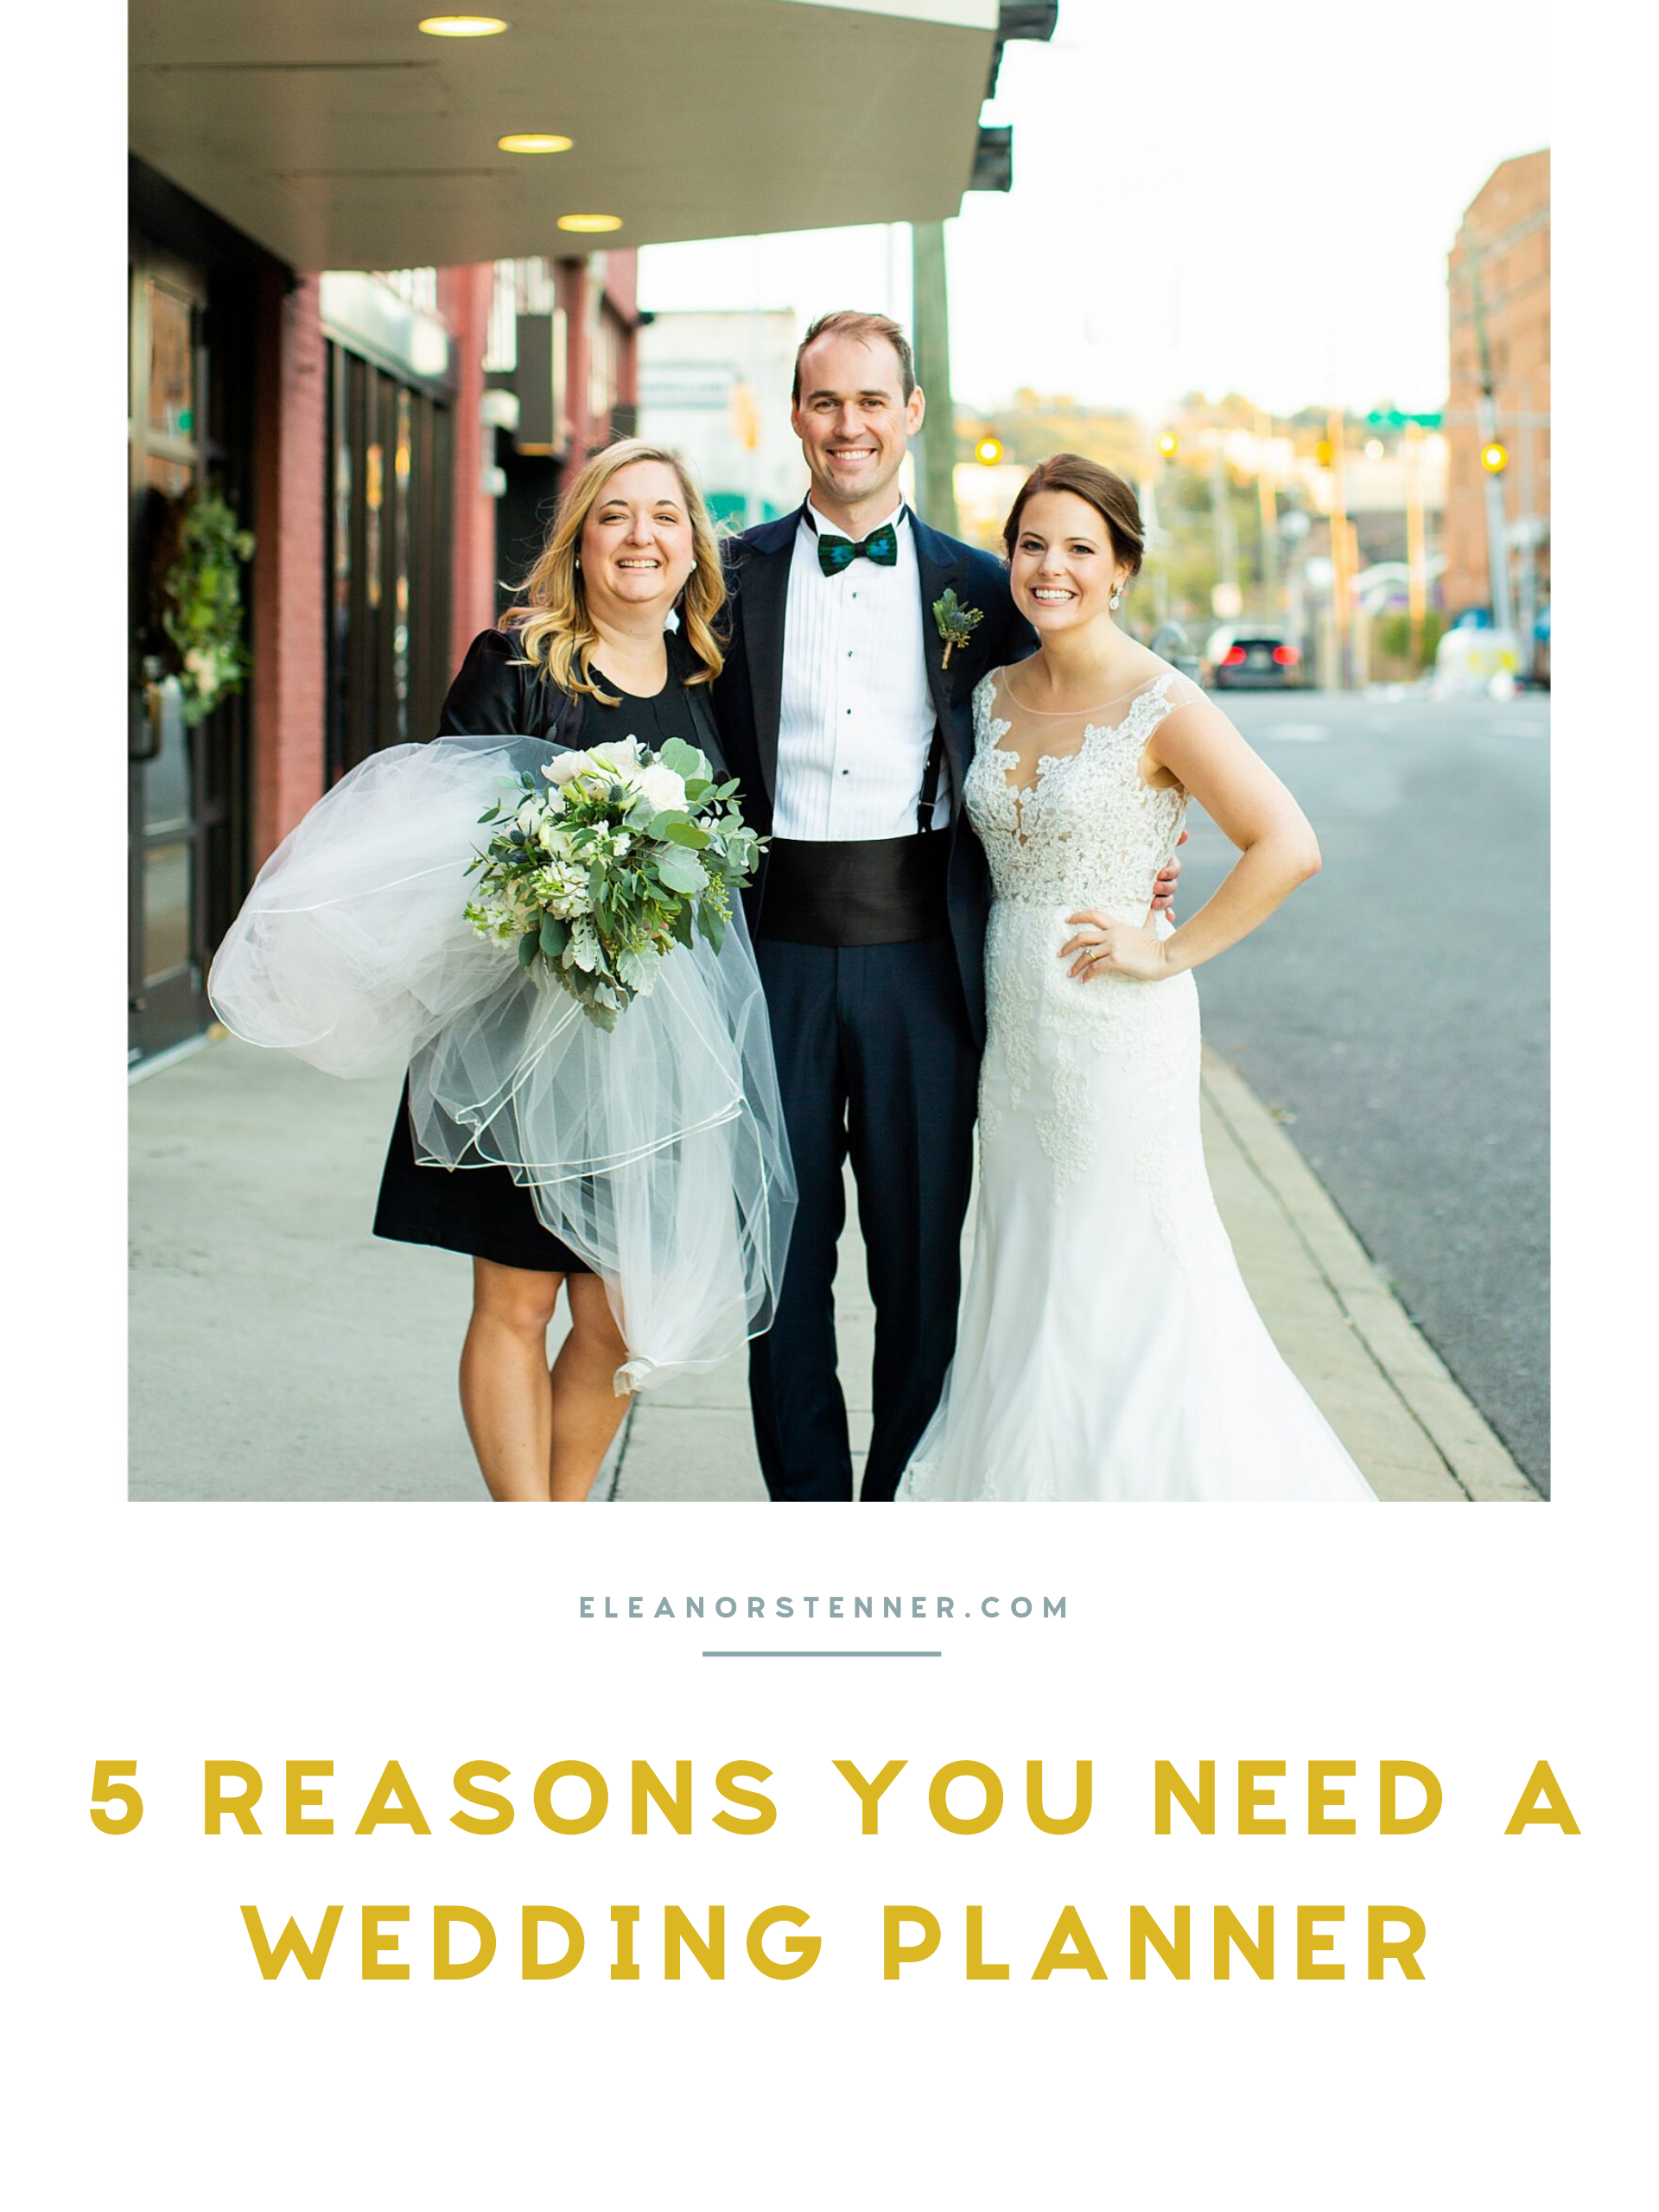 Ashley Stork from Magnolia Vine Events in Birmingham, AL shares 5 reasons why you need a wedding planner to make your day calm, fun and enjoyable for all!